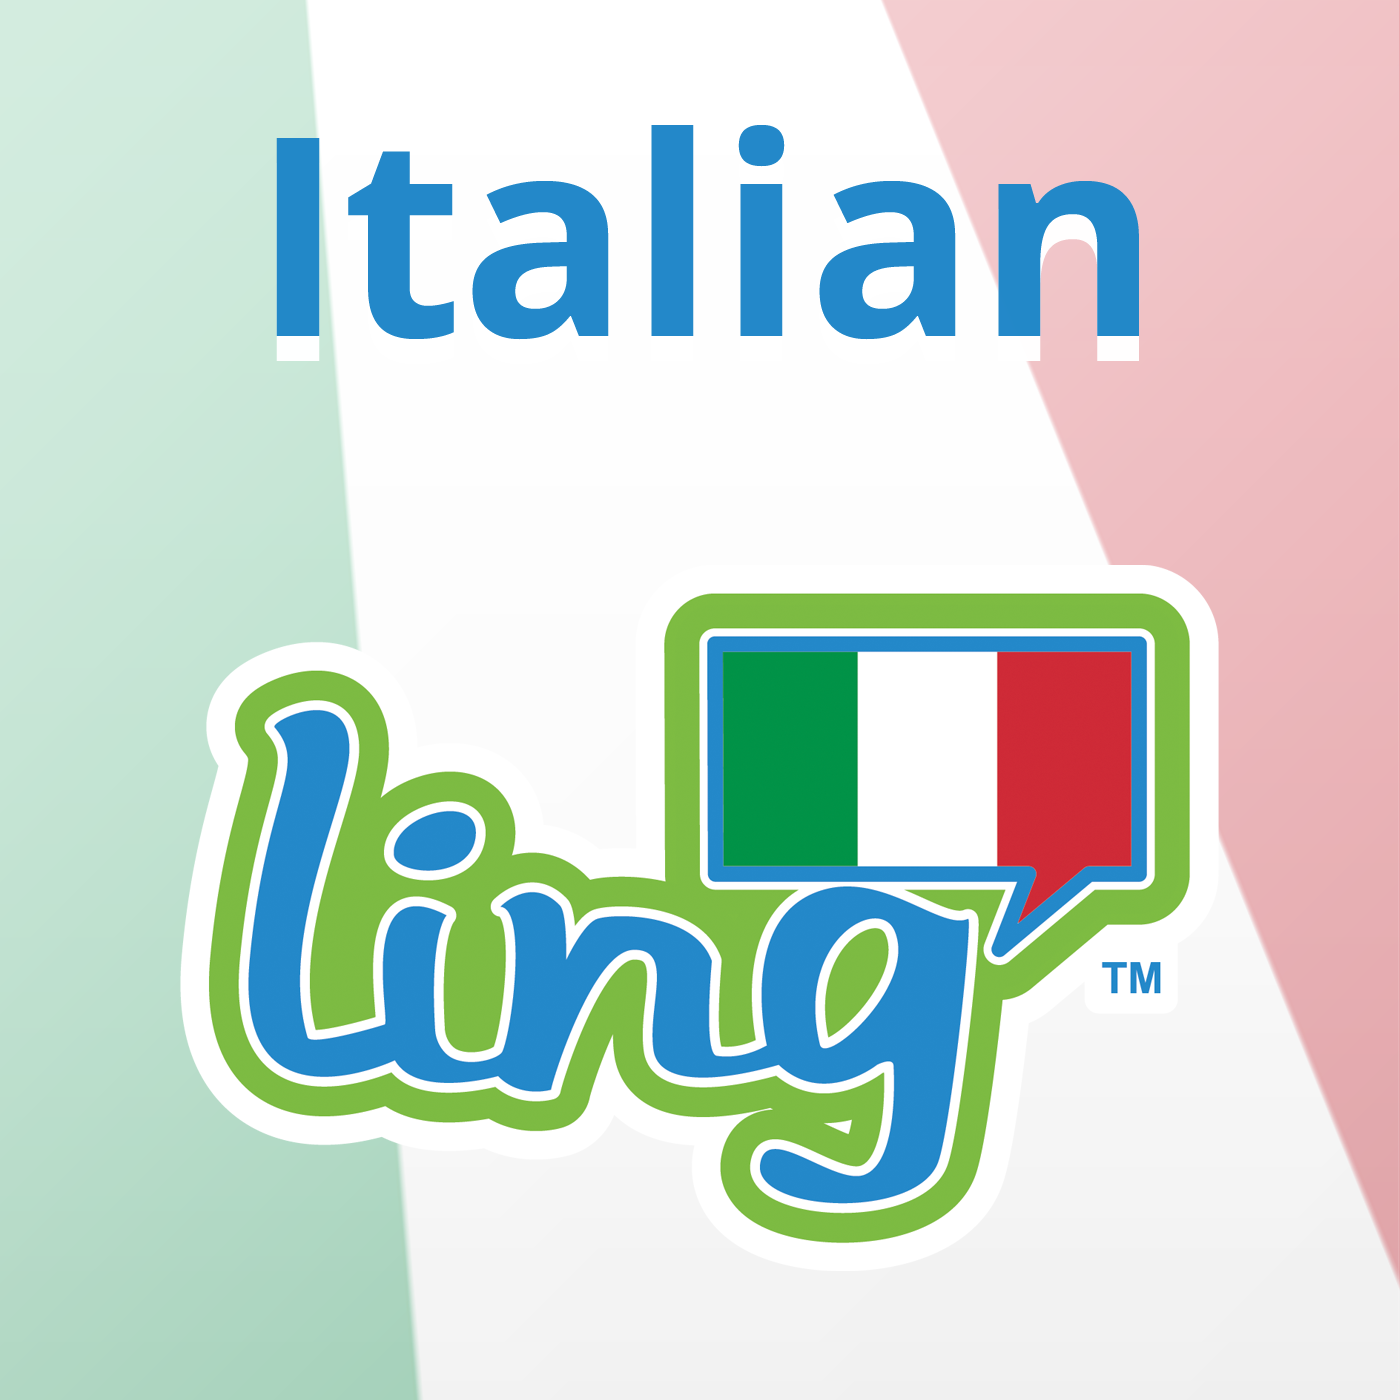 Learn Italian from the ItalianLingQ podcast. Each episode can be studied using the learning tools available at LingQ.com.